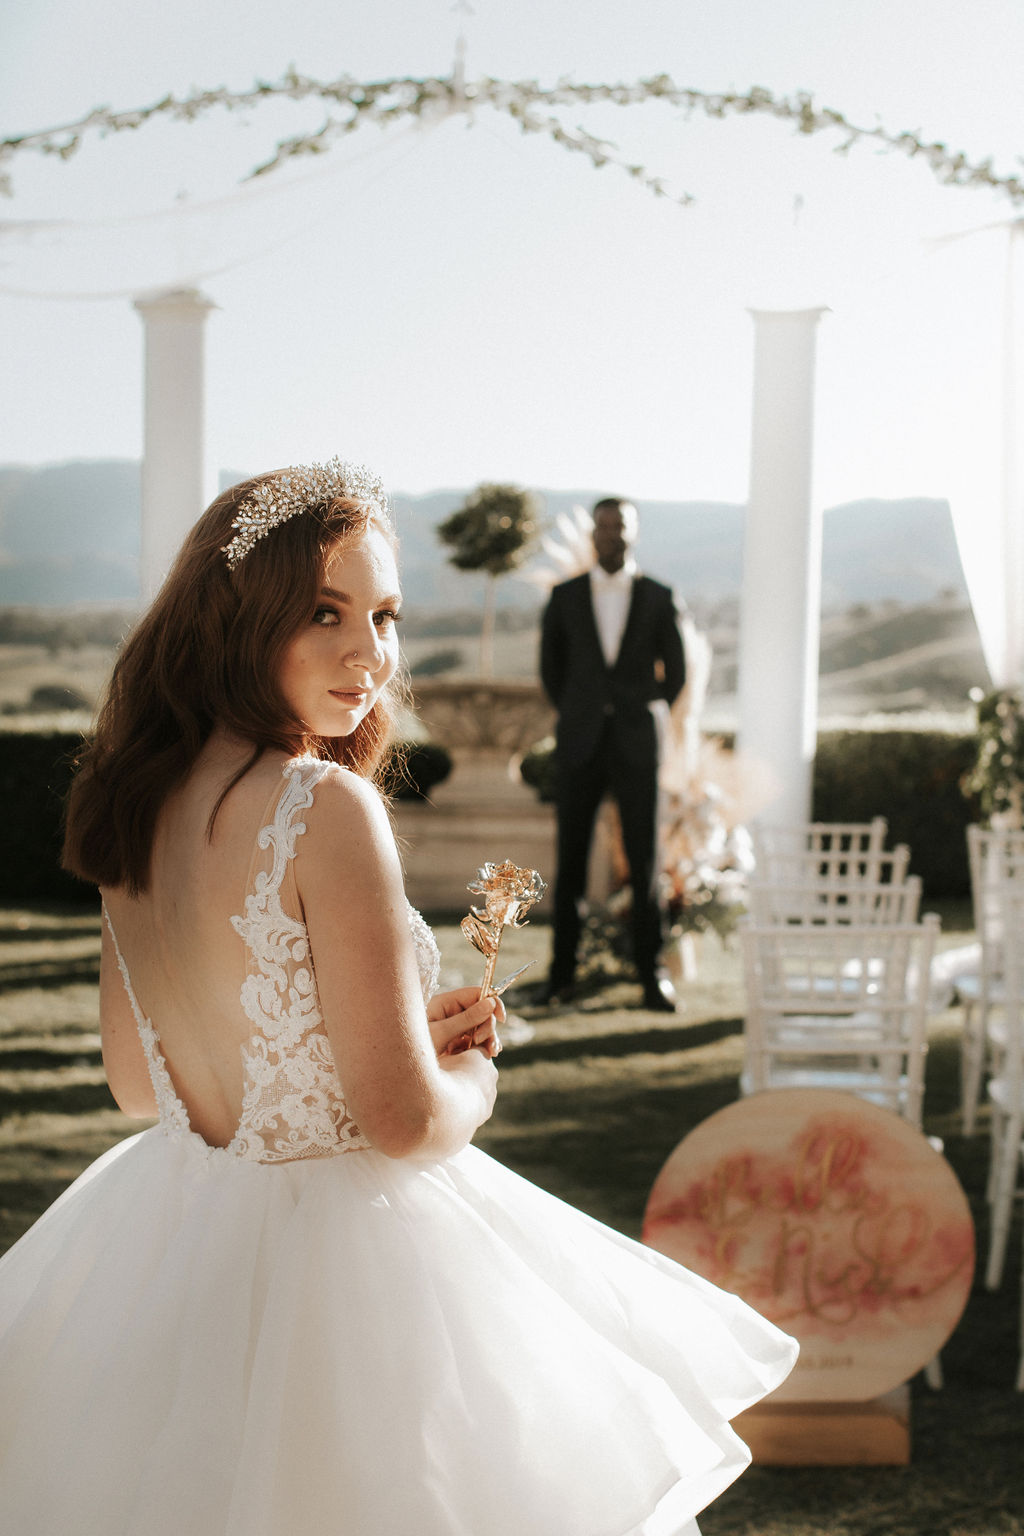 Beauty & the Beast Styled Shoot | Olive Rose Weddings & Events